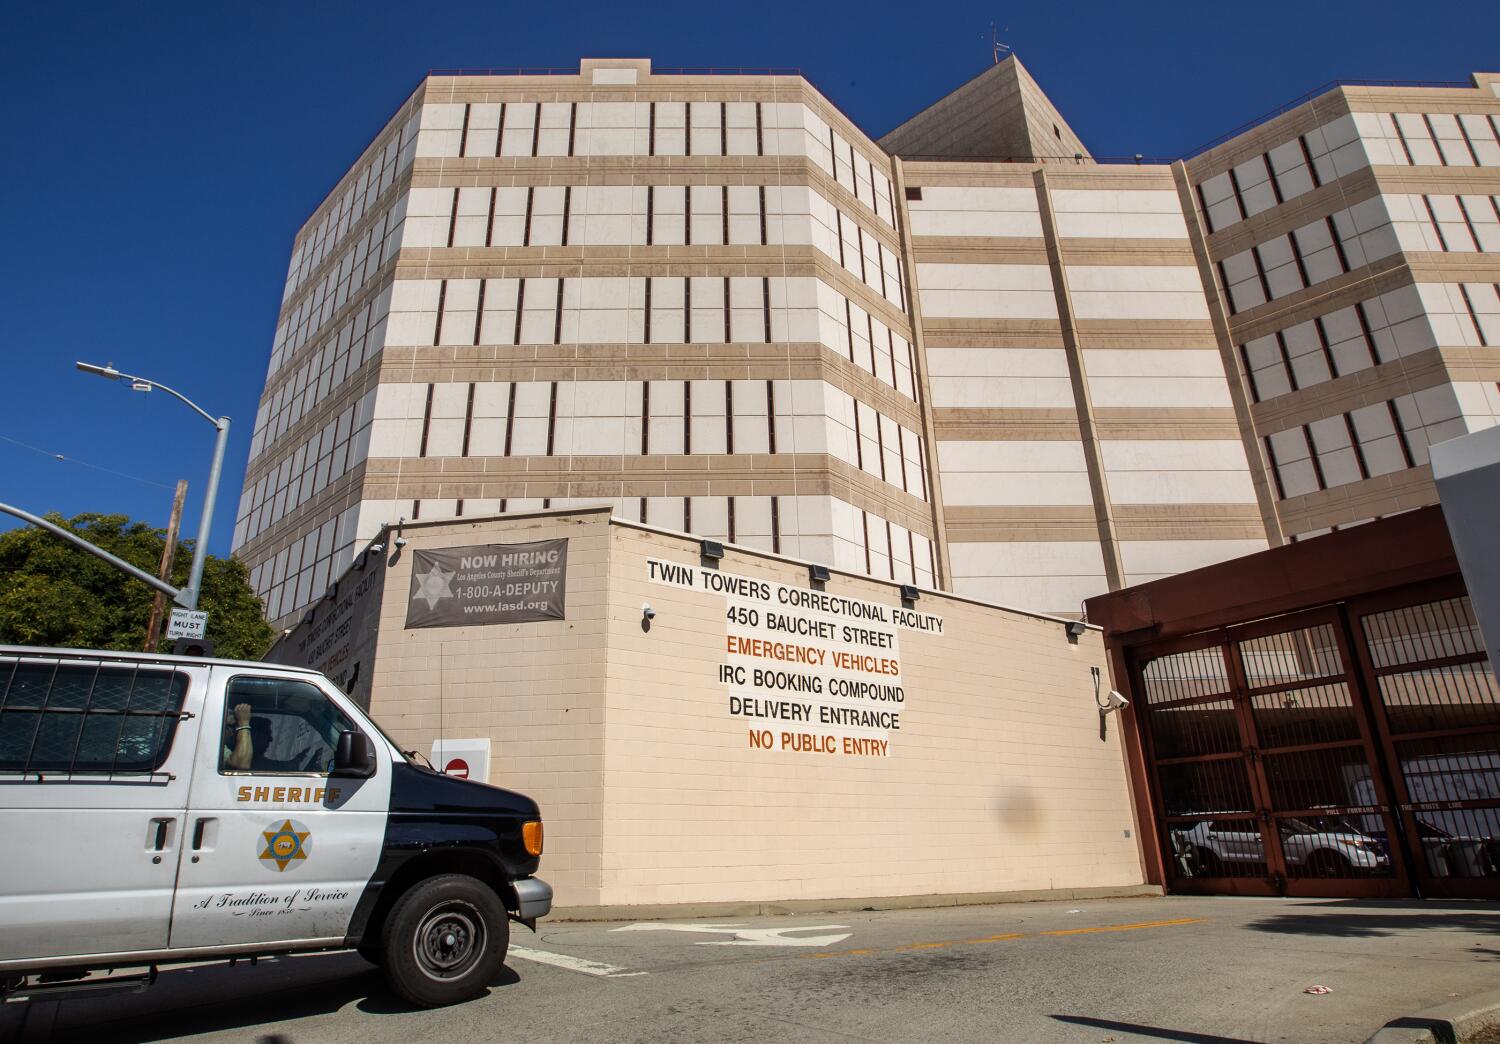 Hepatitis A scare at Men's Central Jail led to more than 1,500 vaccinations